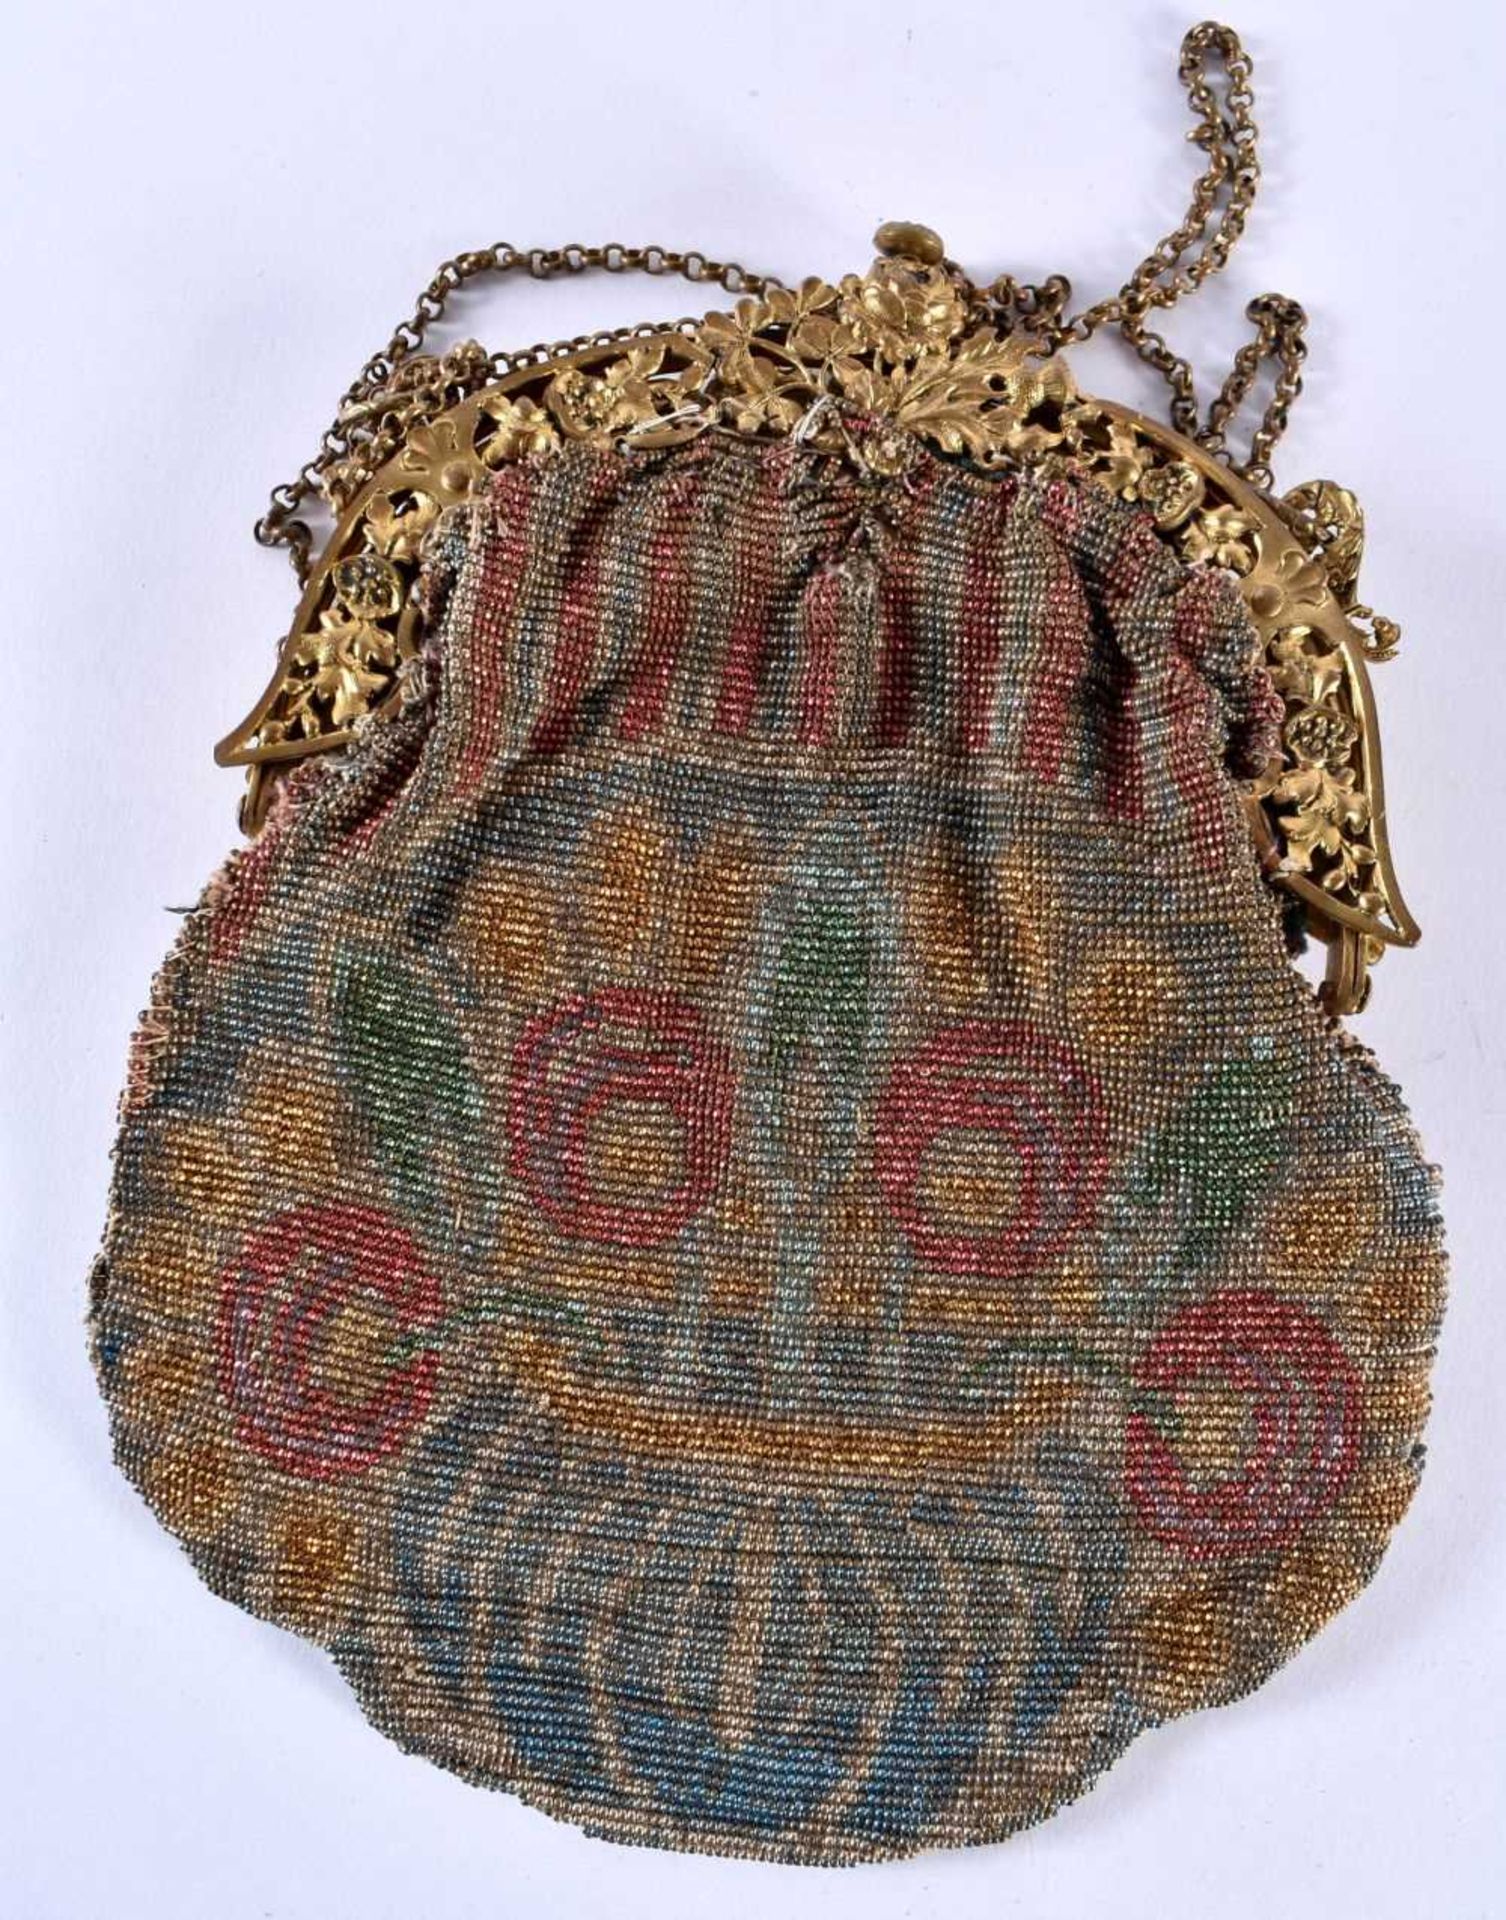 A Beadwork Bag with Gilt Mounts. 19cm x 15cm, weight 285g - Image 5 of 5